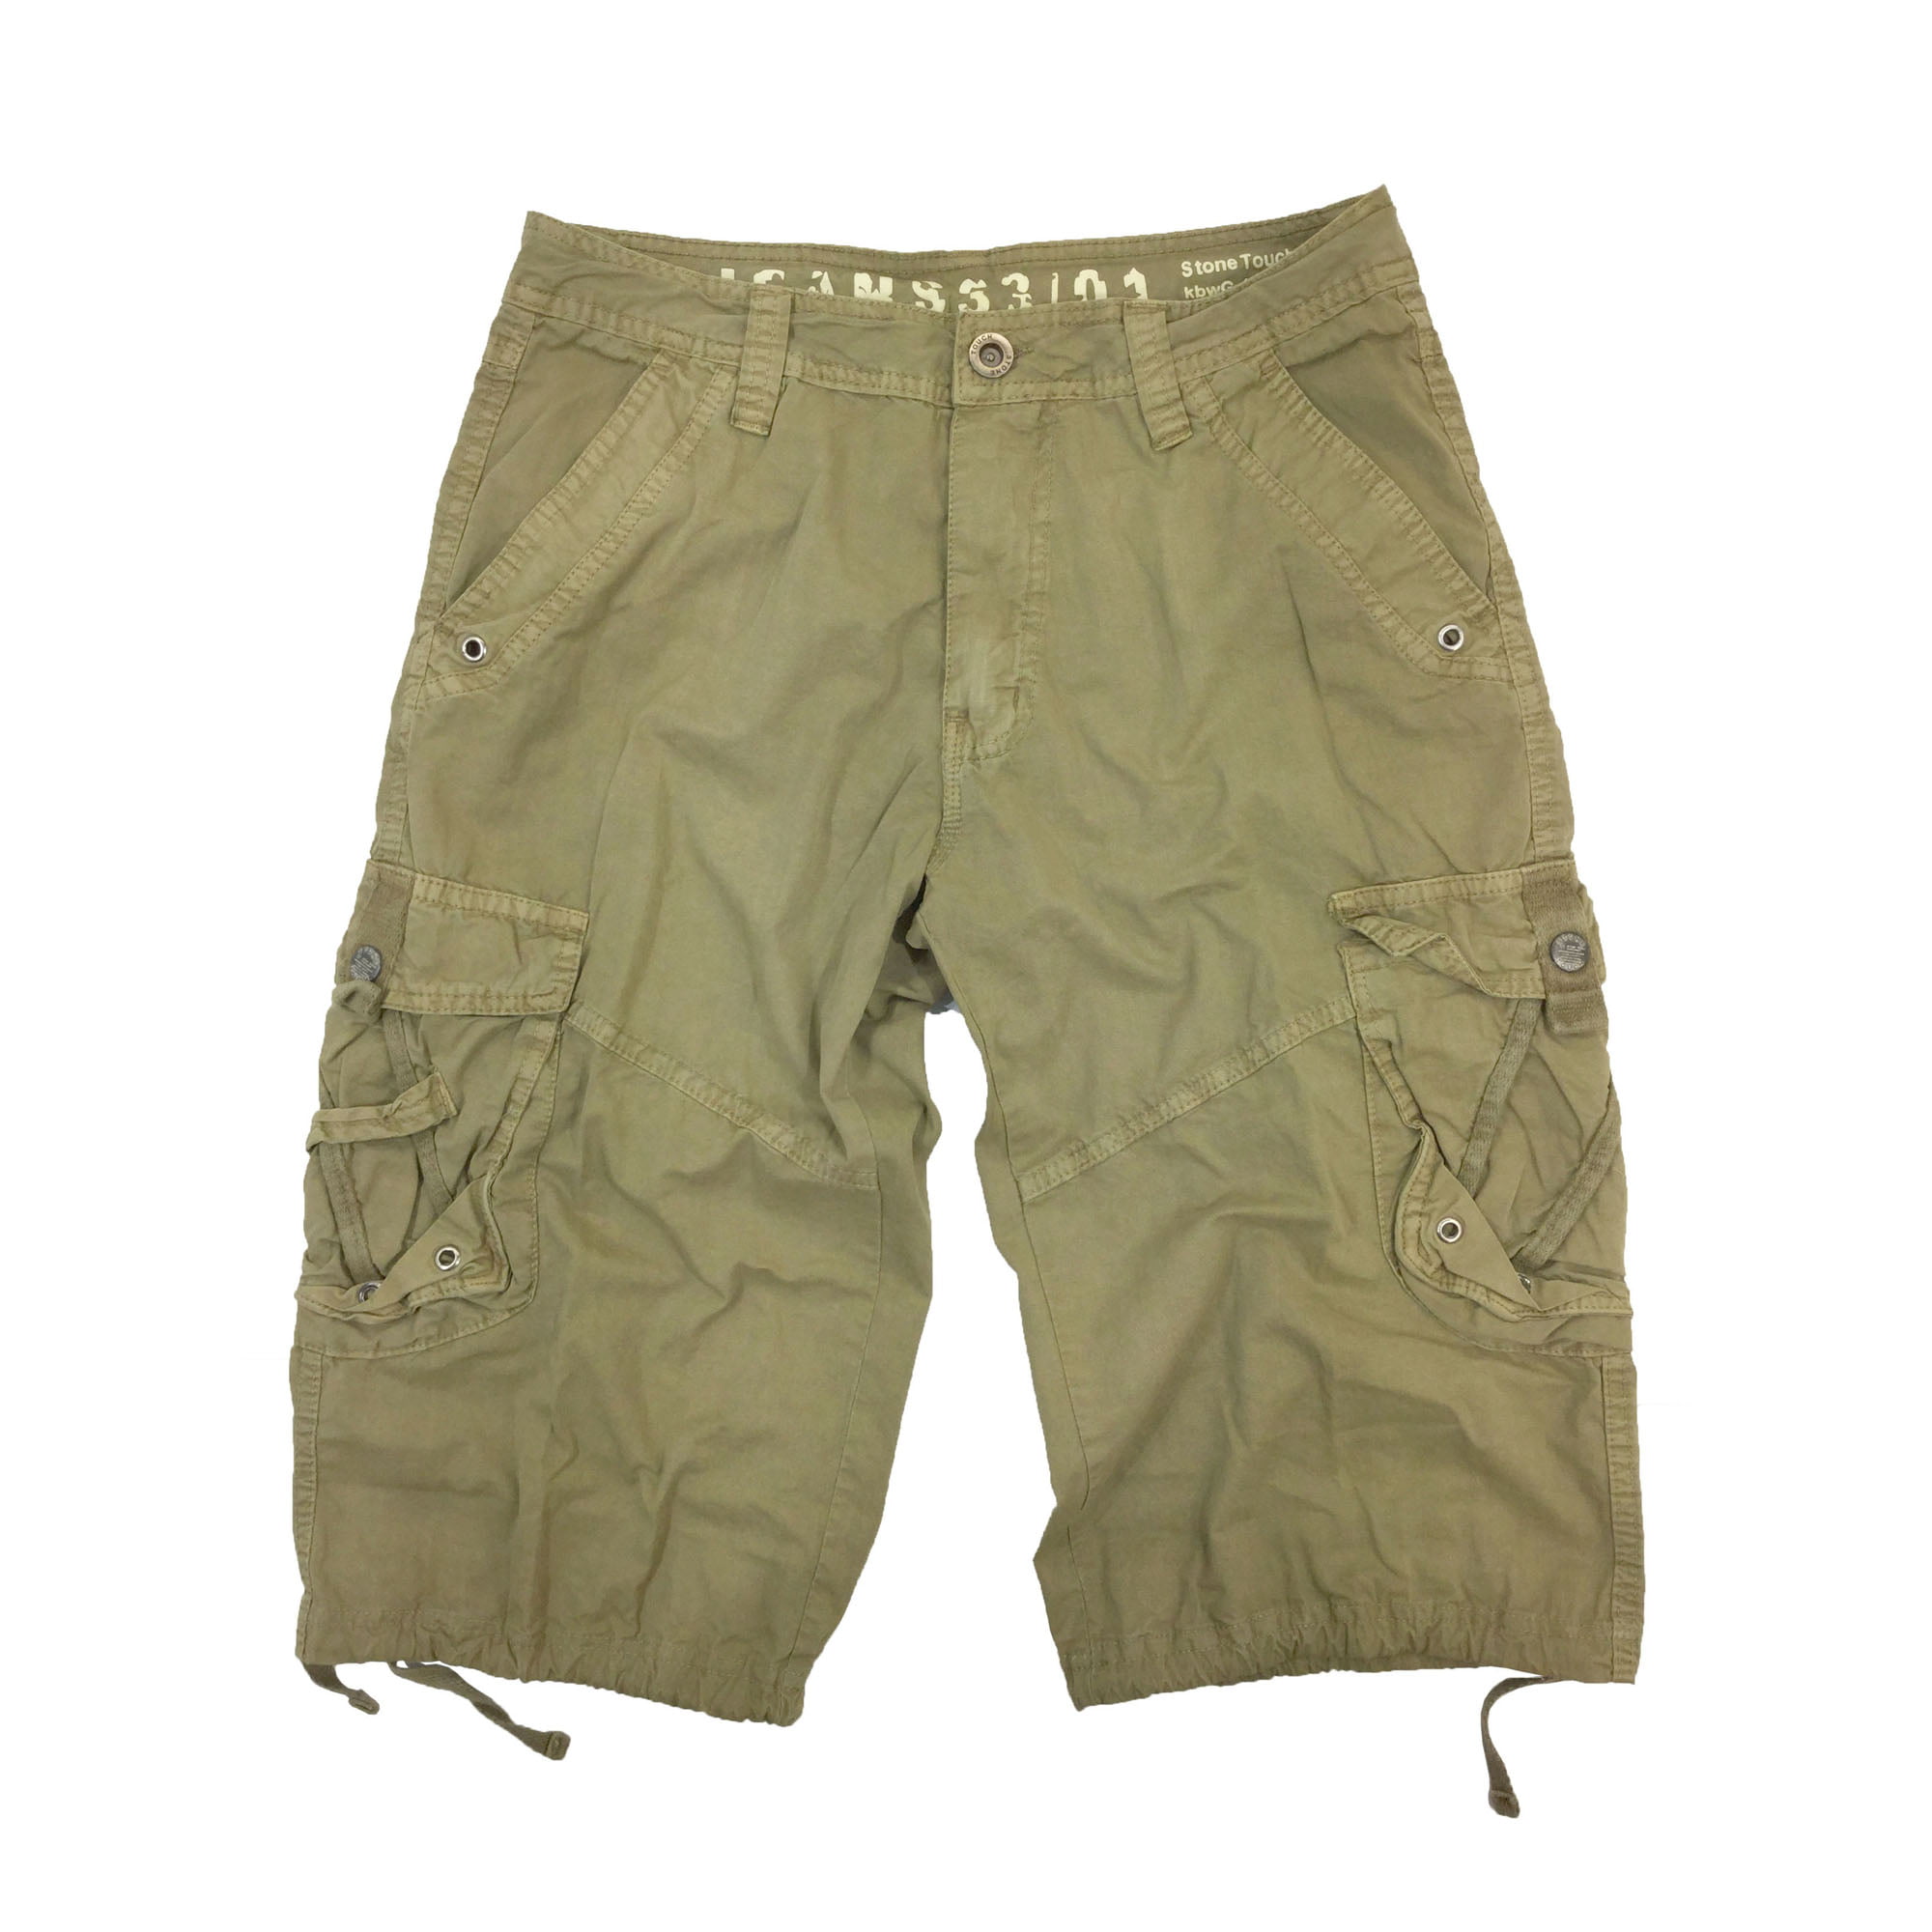 Stone Touch Jeans - Mens Military Khaki Cargo Shorts 15 inches inseam # ...